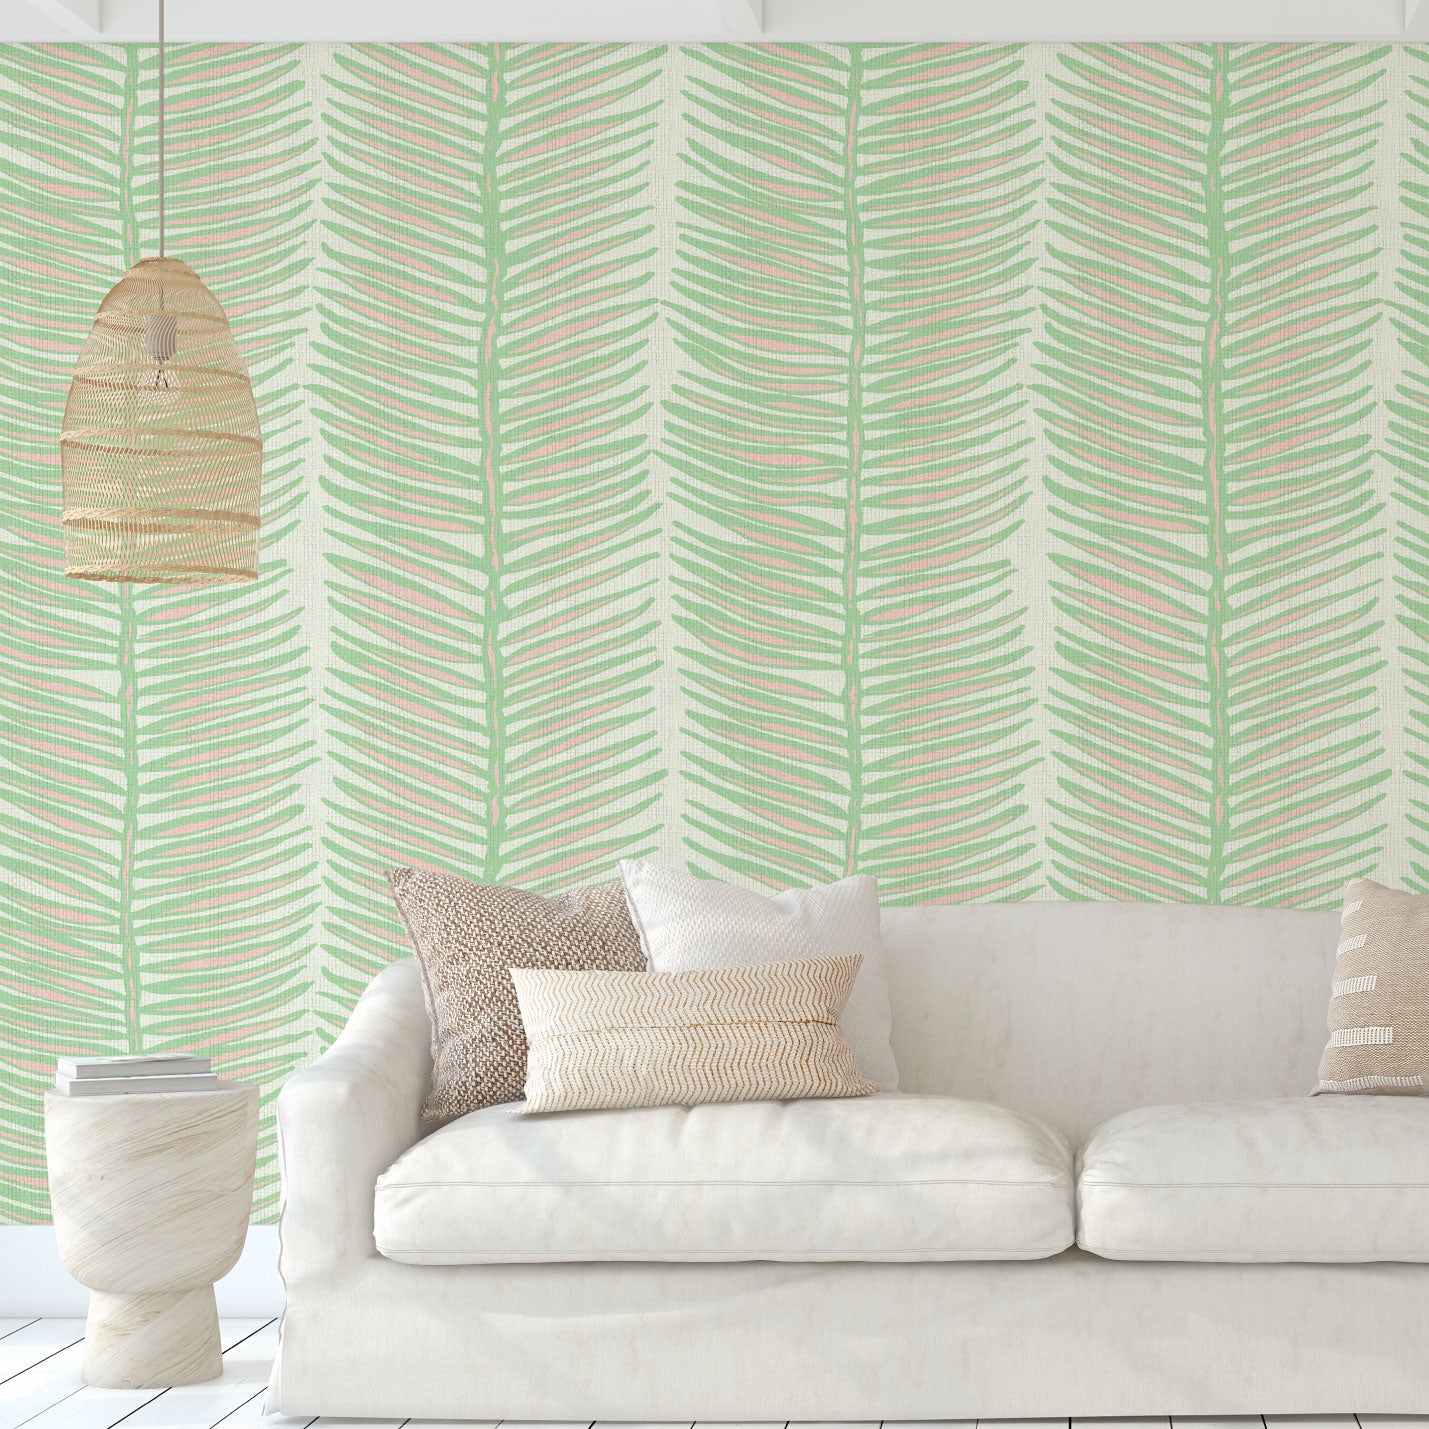 paper weave wallpaper Natural Textured Eco-Friendly Non-toxic High-quality Sustainable Interior Design Bold Custom Tailor-made Retro chic Tropical Jungle Coastal Garden Seaside Seashore Waterfront Vacation home styling Retreat Relaxed beach vibes Beach cottage Shoreline Oceanfront Nautical Cabana preppy palm fern leaf vertical stripe pastel pink light pale mint green